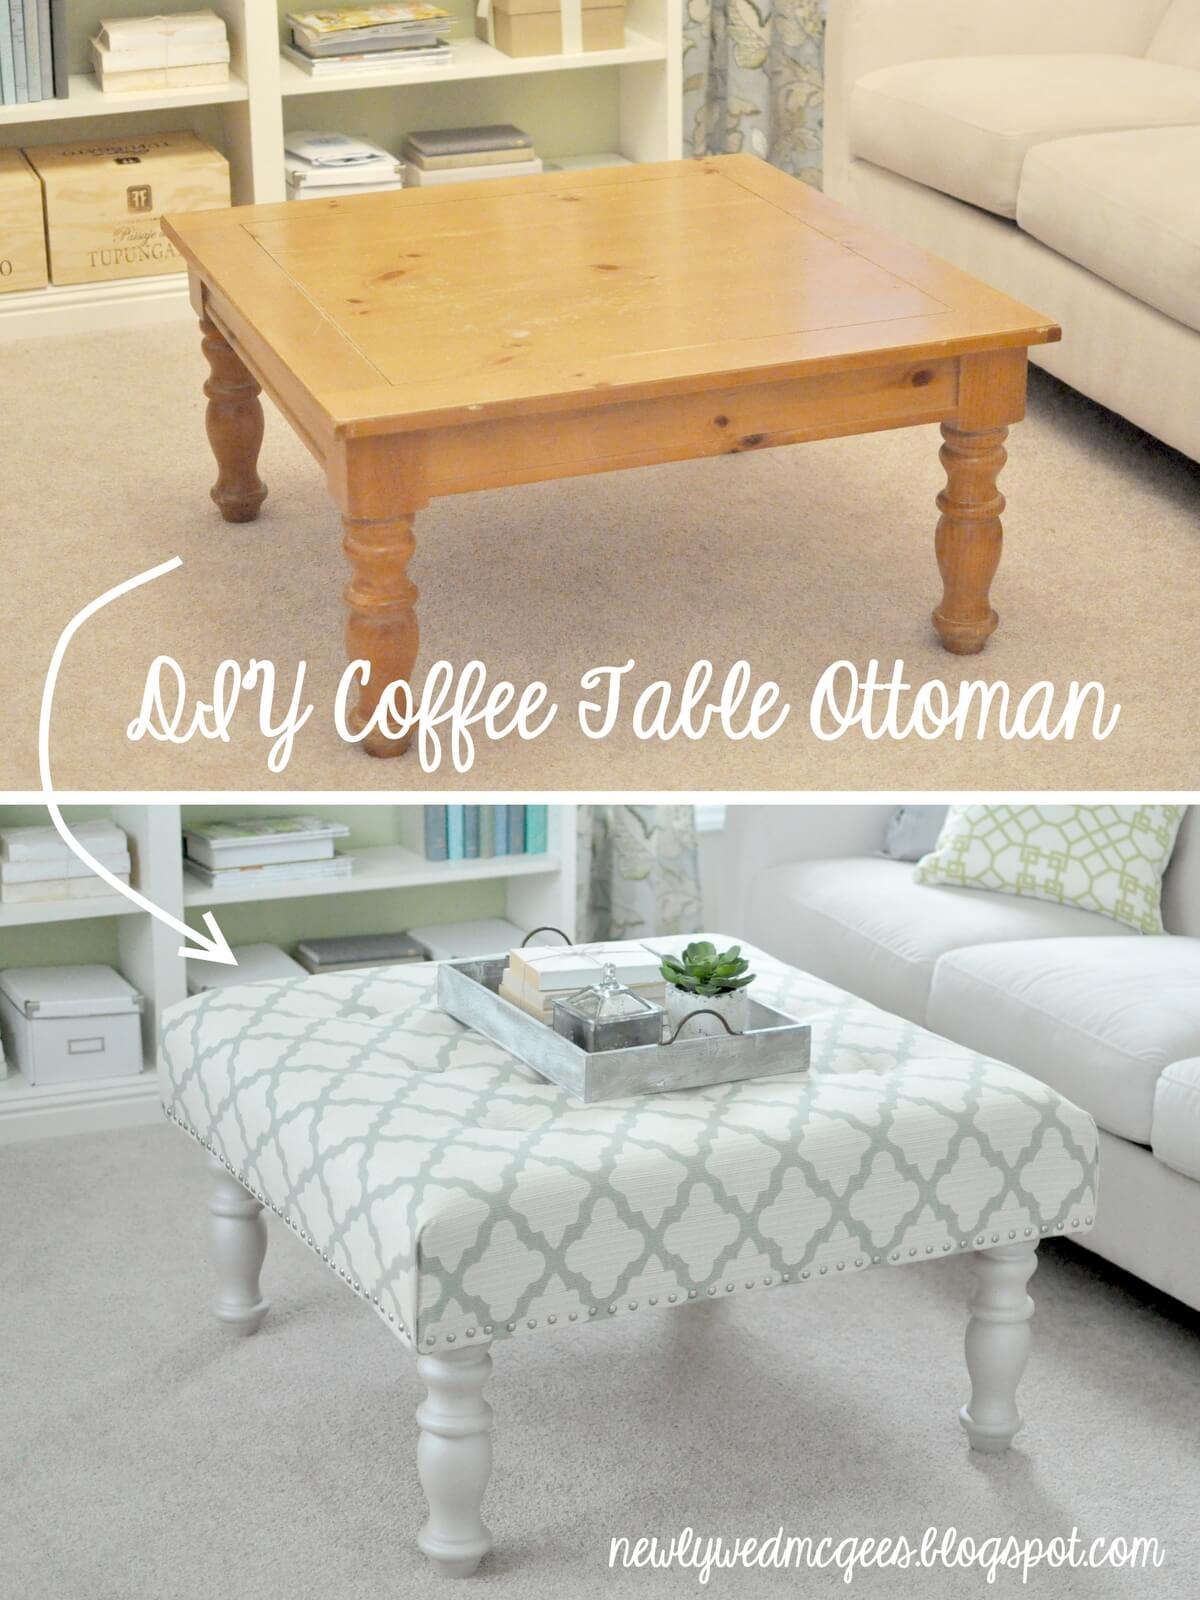 Upholster a Coffee Table Ottoman